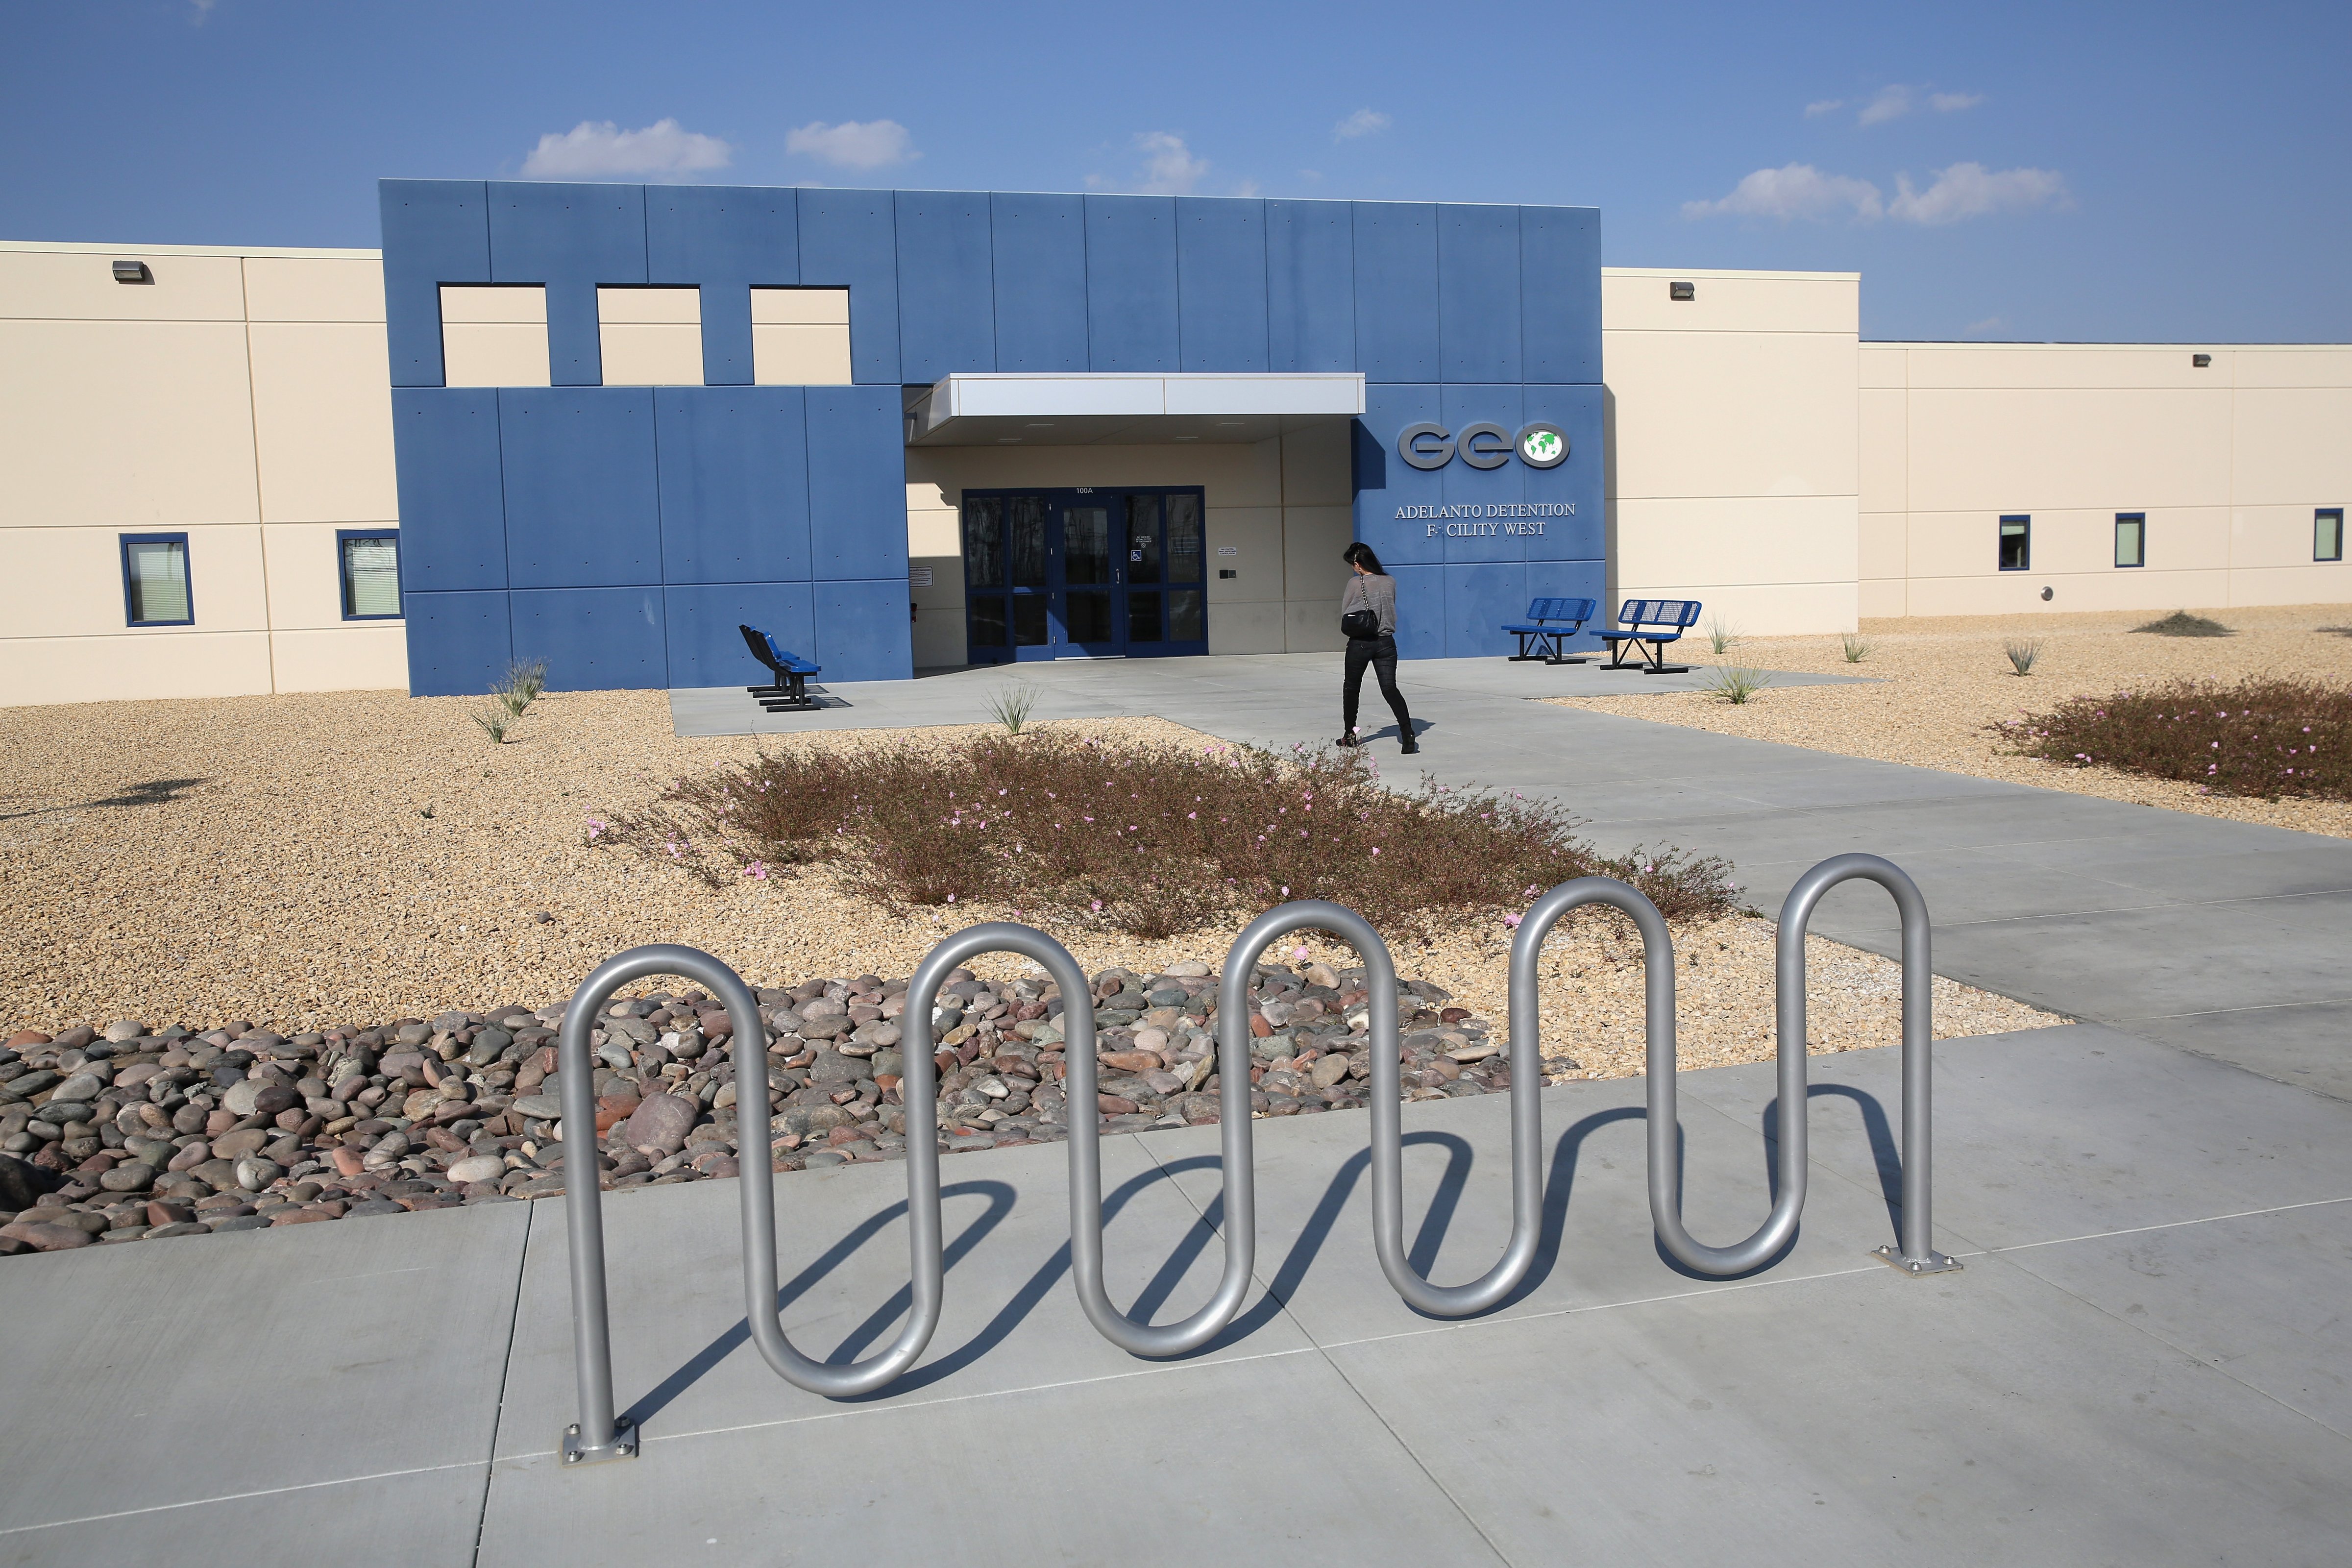 An immigrant who worked for $1/day while detained at Adelanto Detention Facility between 2012 and 2015 is now suing GEO Group, the private contractor who runs the facility (John Moore—Getty Images)